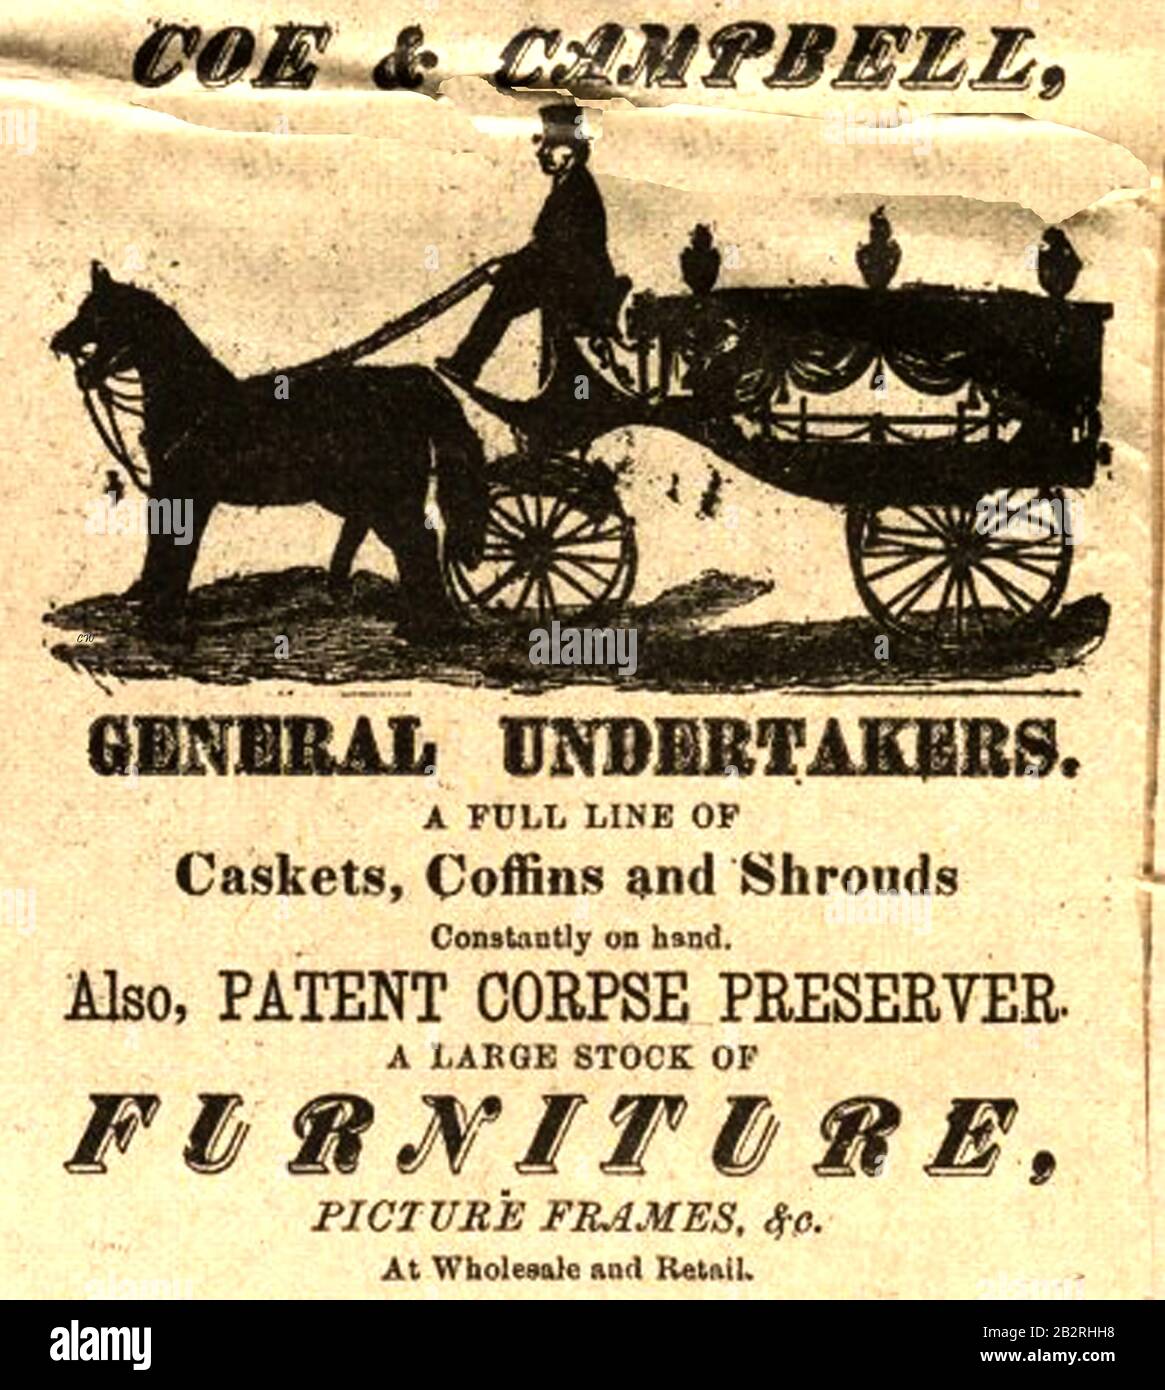 A Victorian  Undertakers advertisement. It's interesting to see that as well as having a range of caskets, coffins,shrouds and a patent corpse preserver, Coe and Campbell also used a patent corpse preserver  and sold picture frames and furniture, wholesale & retail. Stock Photo